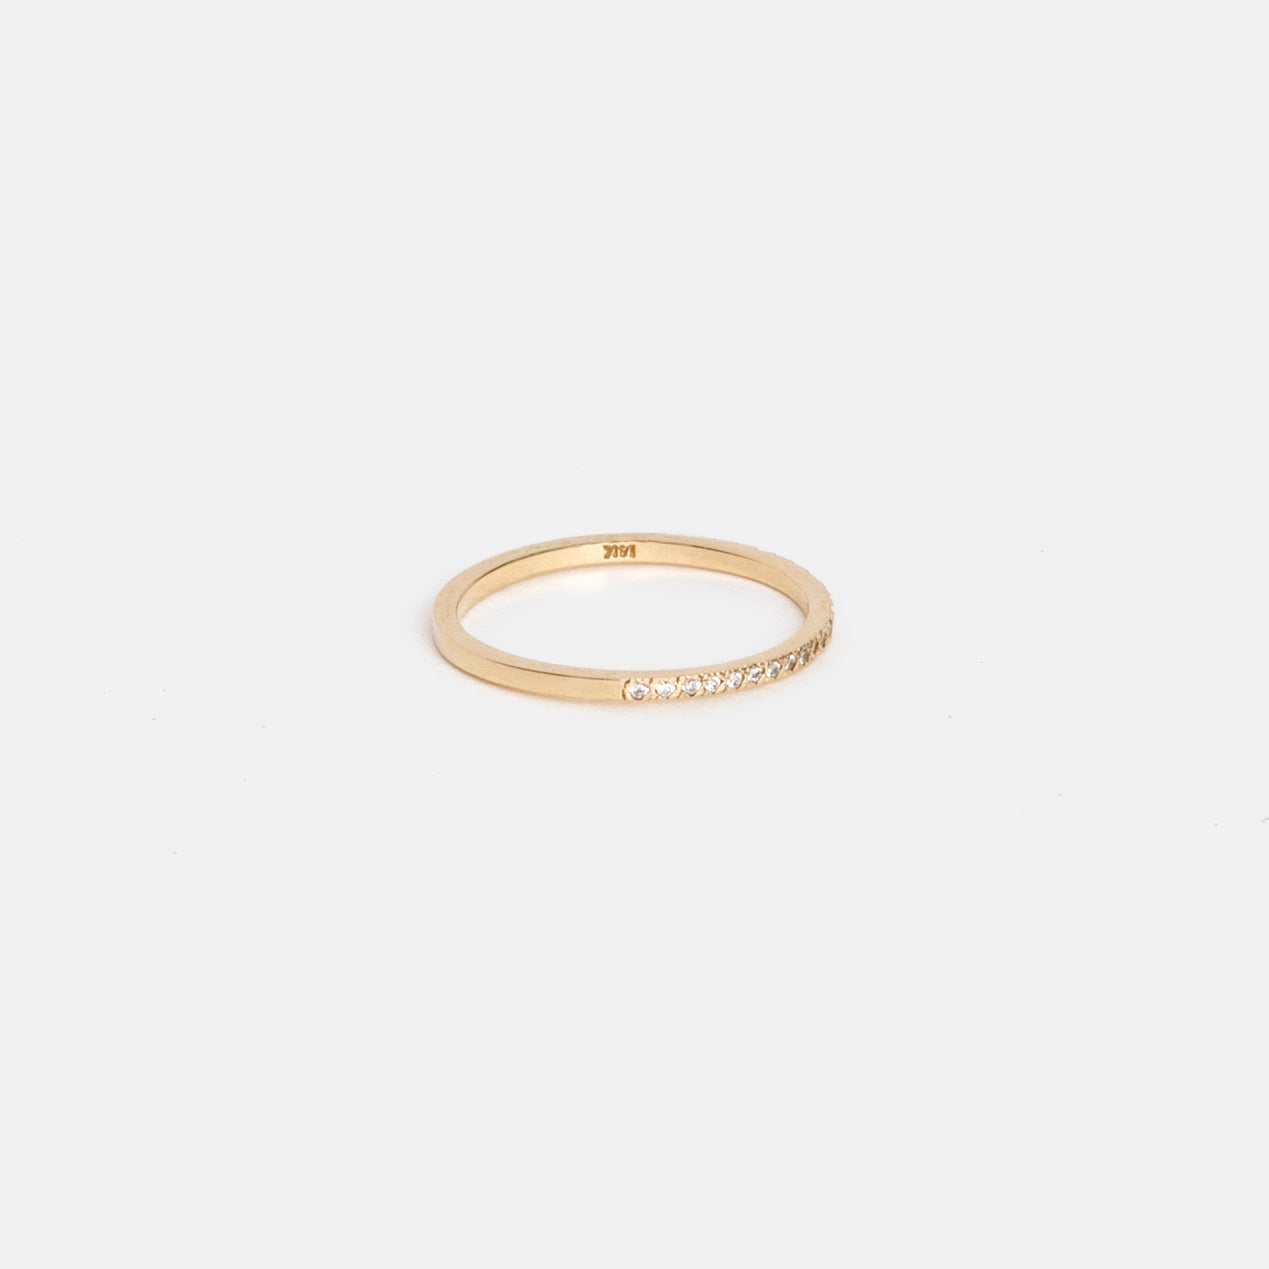 Eile Minimal Ring in 14k Gold set with White Diamonds By SHW Fine Jewelry NYC